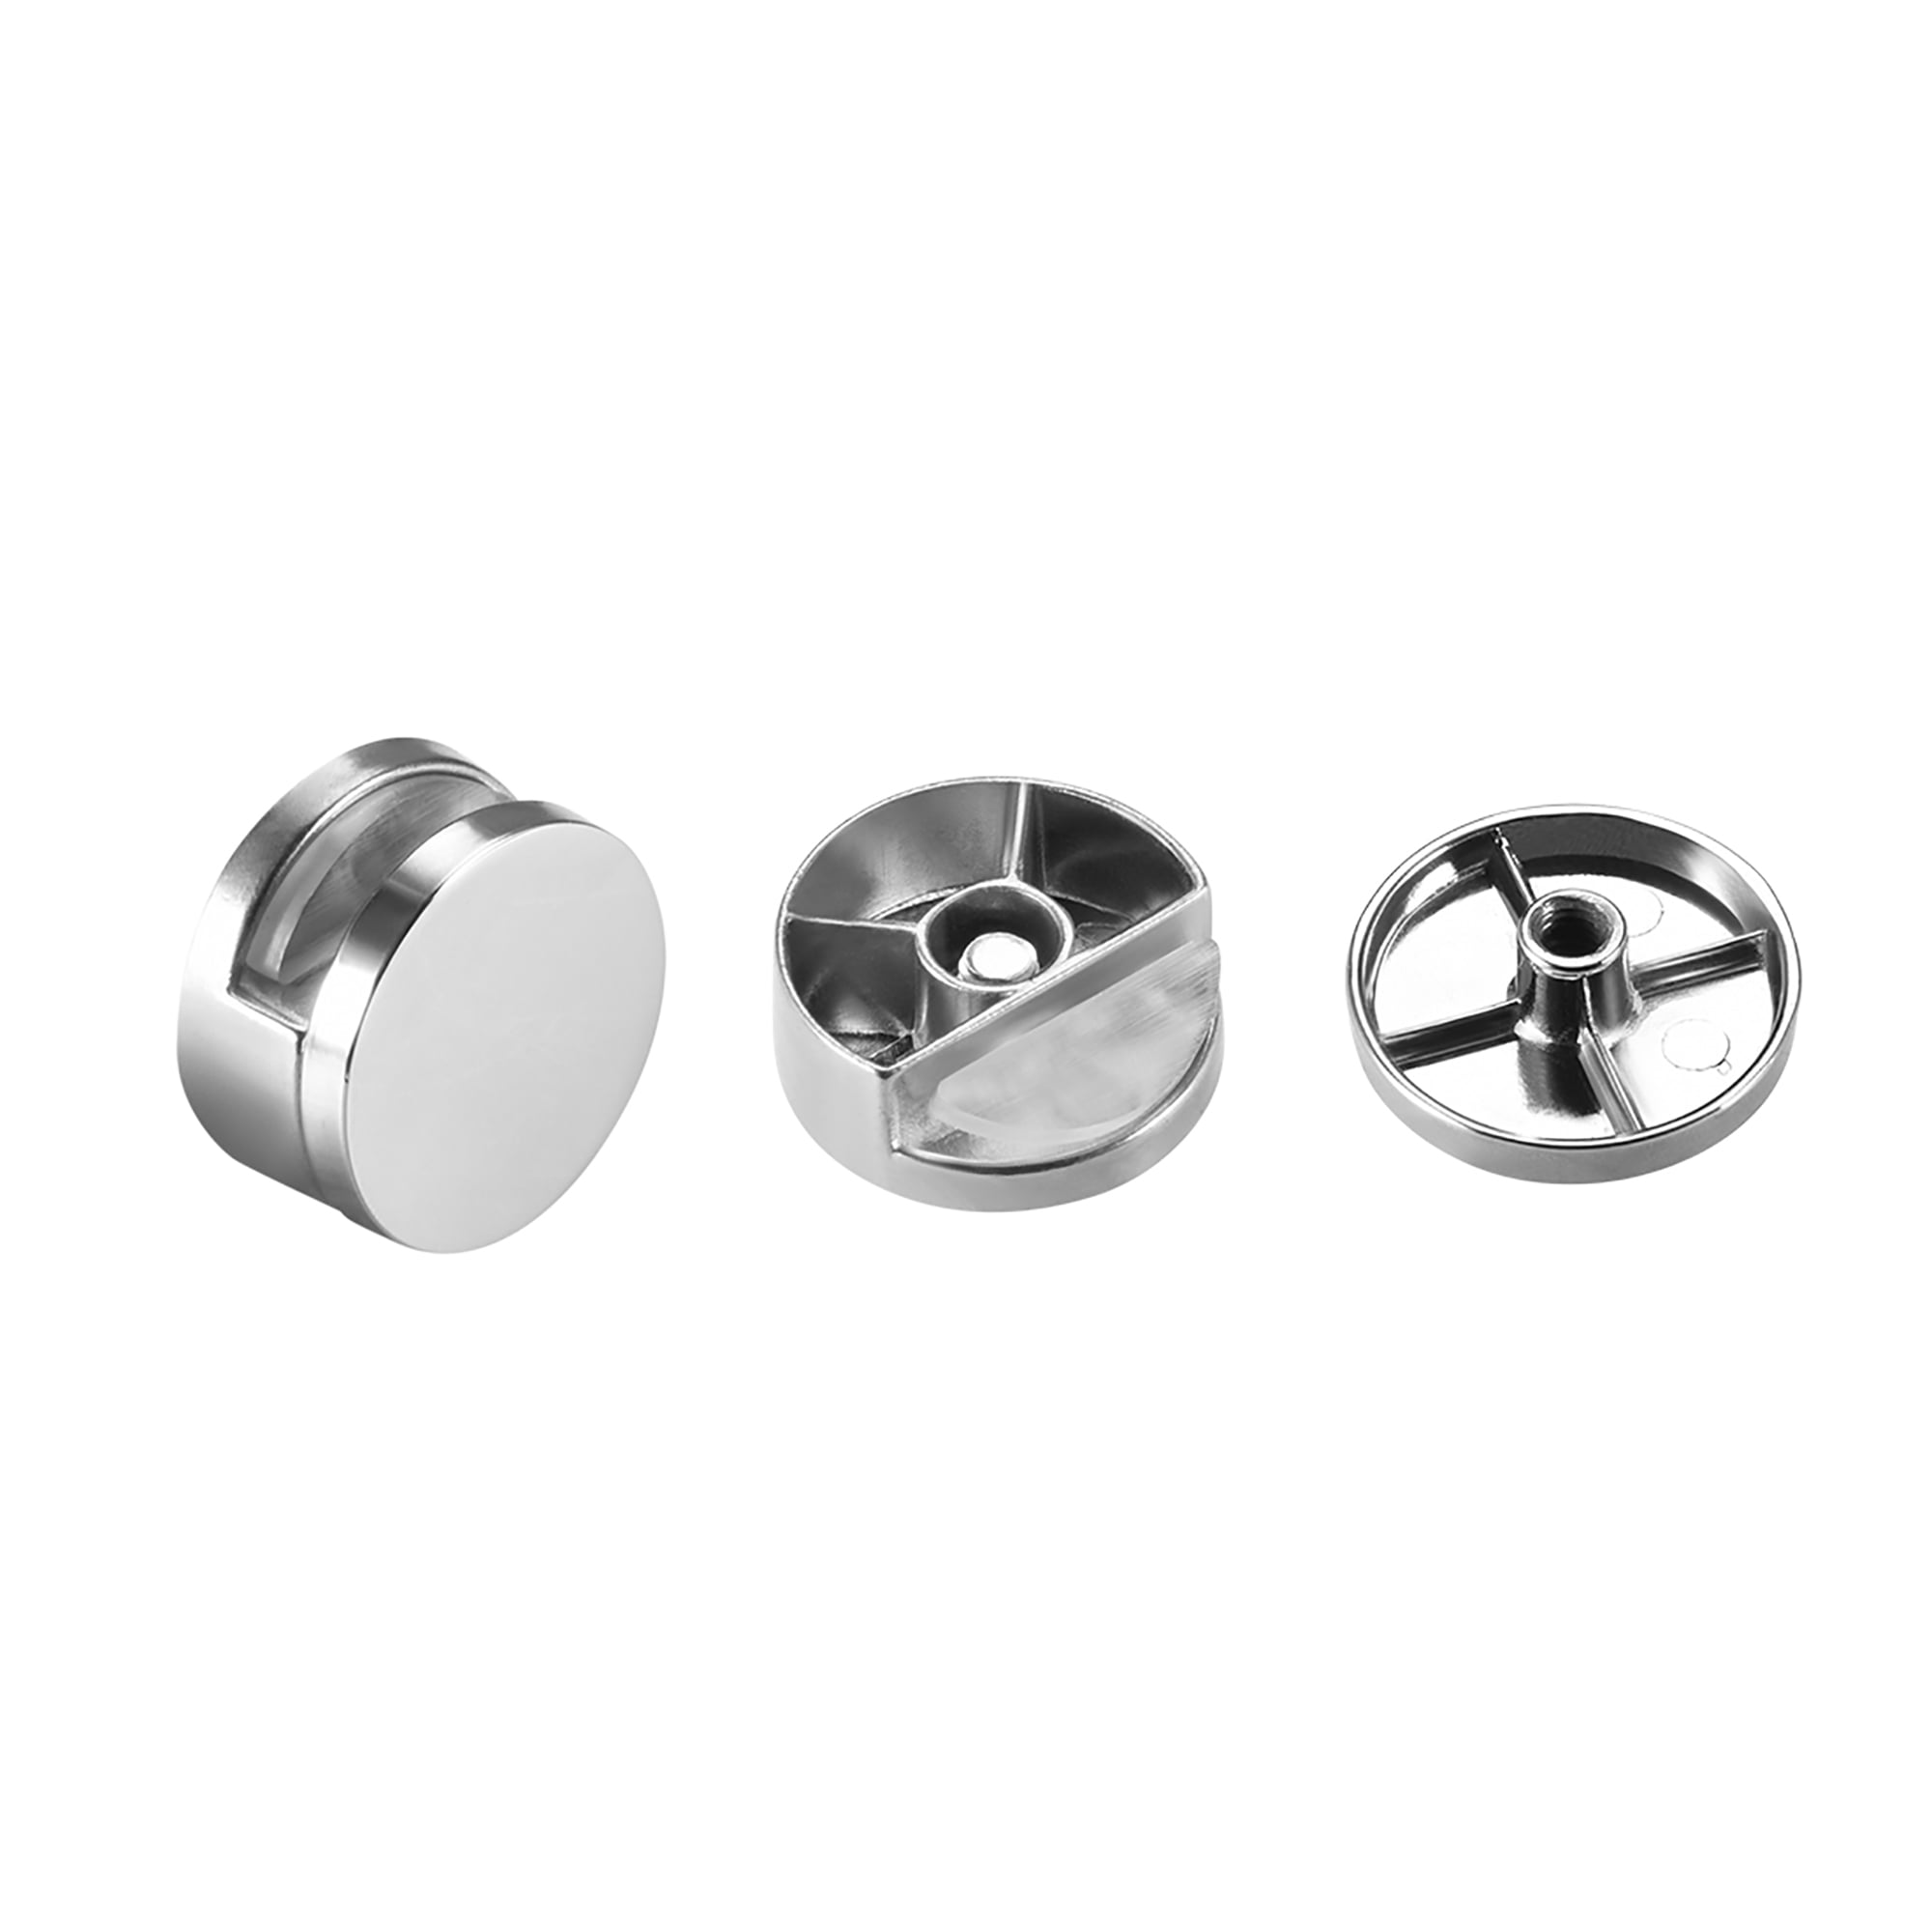 Zinc Alloy Glass Clips Clamps Holder Round Shape Mirror Clips